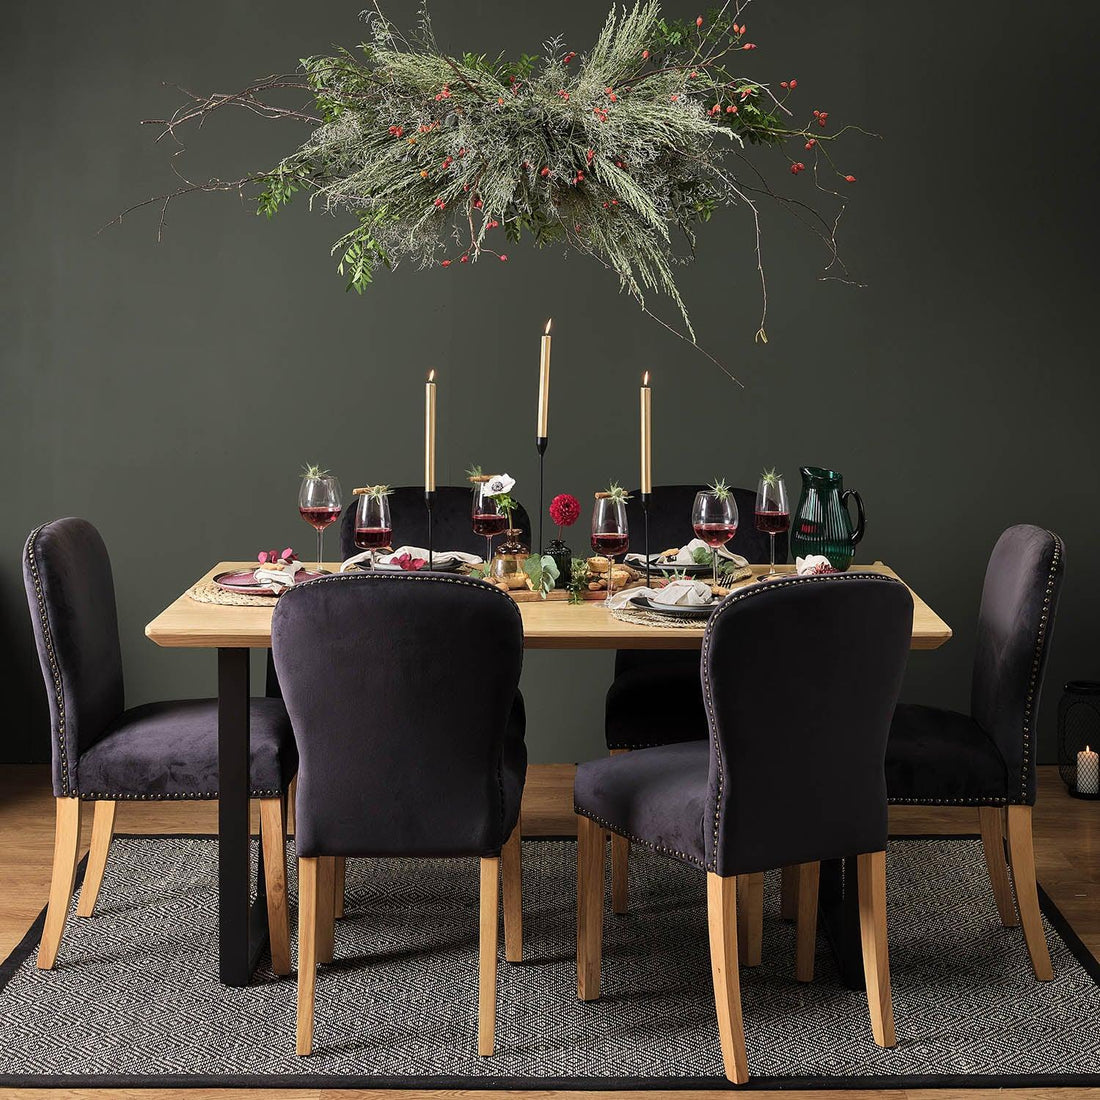 Festive Dining with Laura James - Laura James